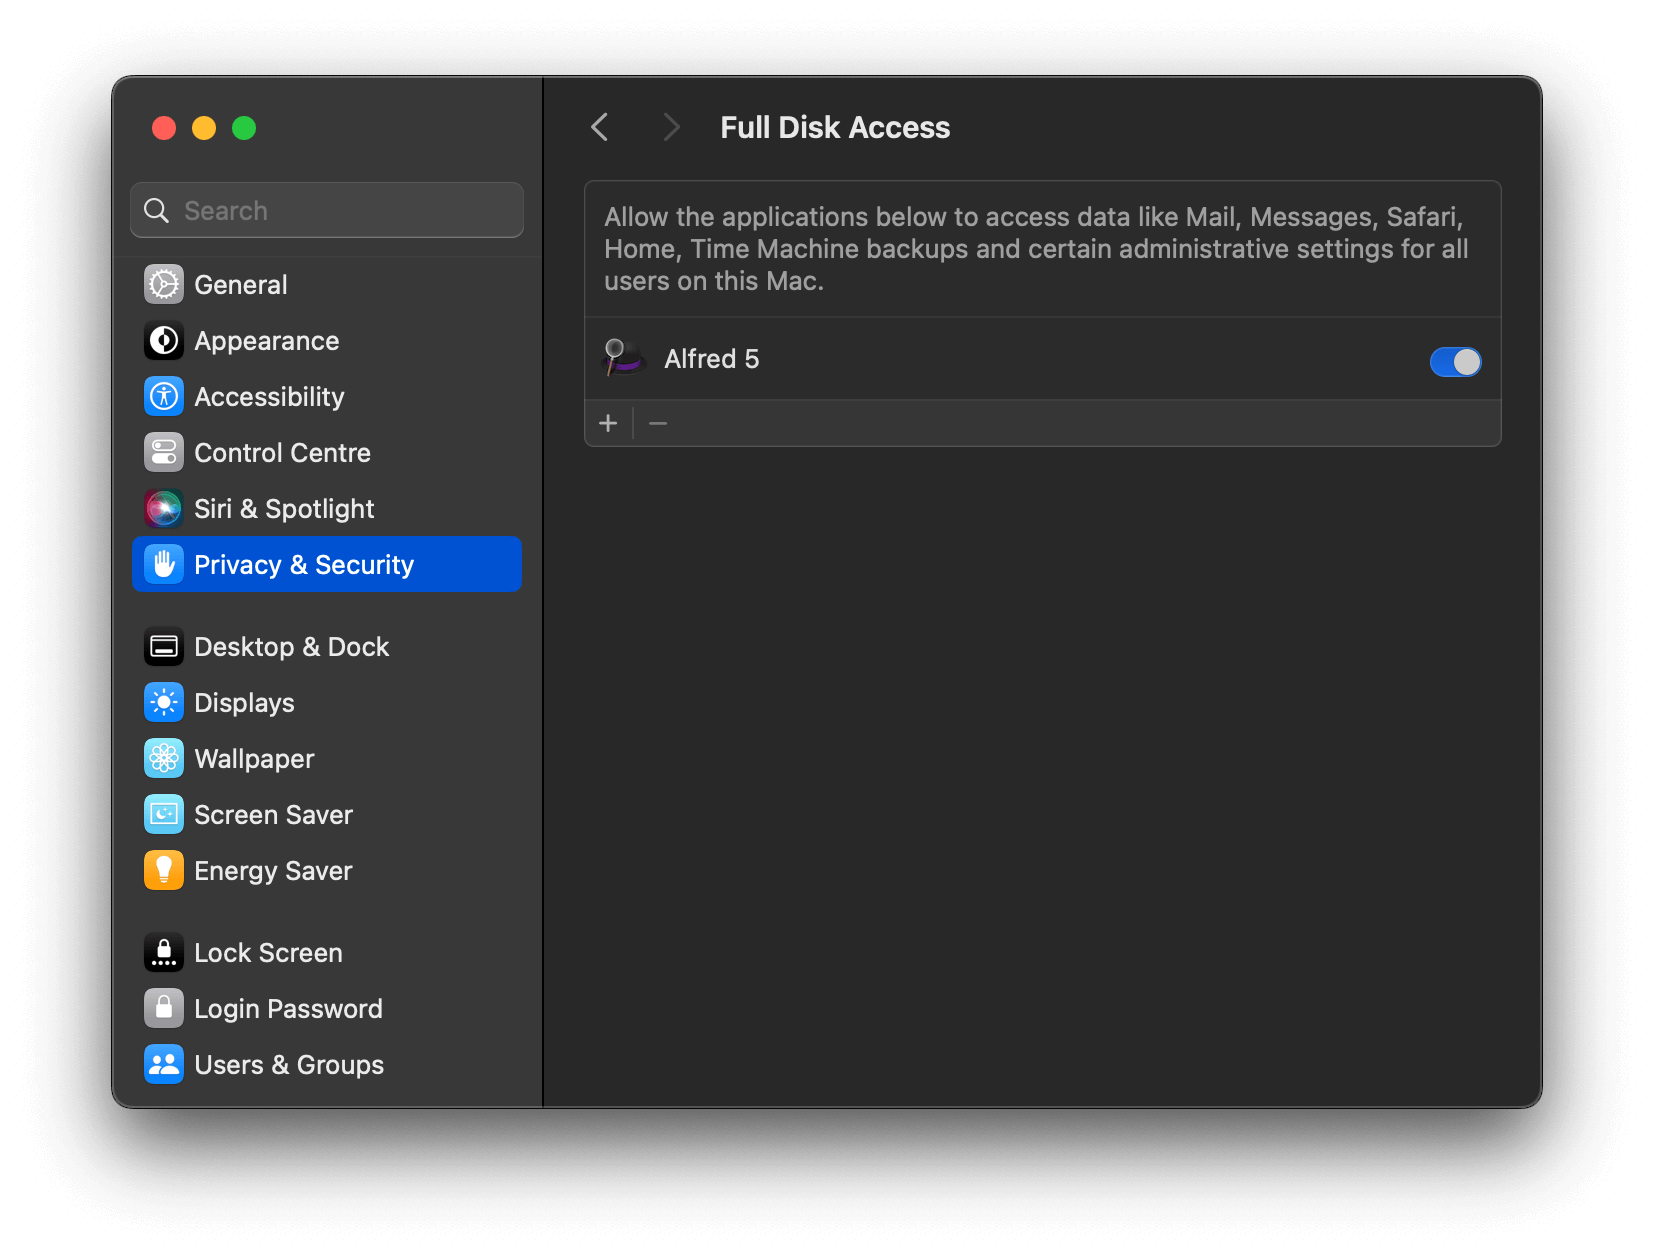 Granting Full Disk Access in macOS Mojave Security and Privacy Preferences